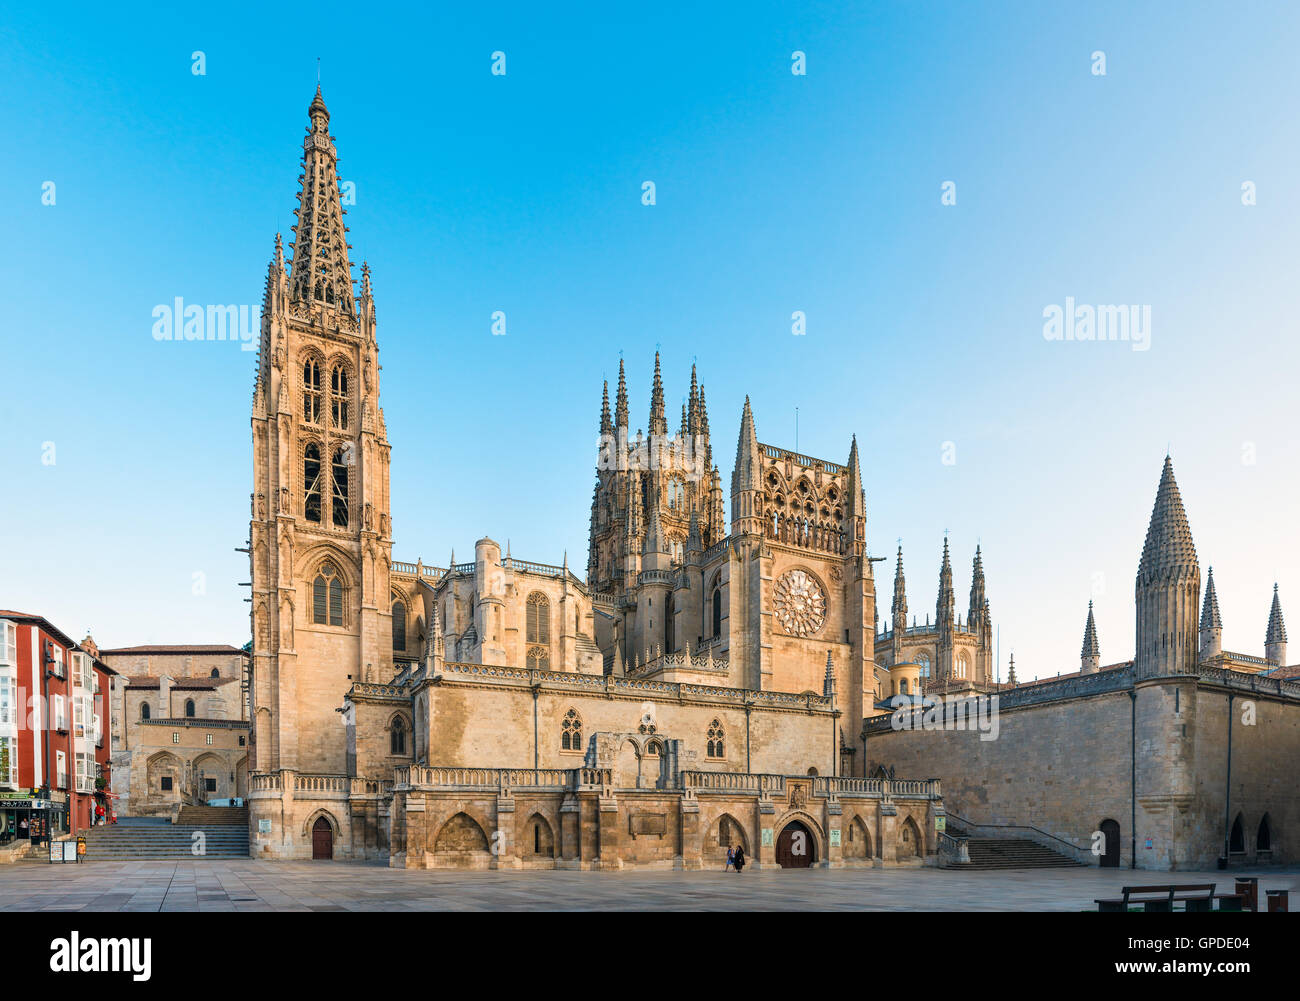 BURGOS, SPAIN - 1 SEPTEMBER, 2016: View of the Cathedral at sunrise. Construction on Burgos' Gothic Cathedral began in 1221 and Stock Photo